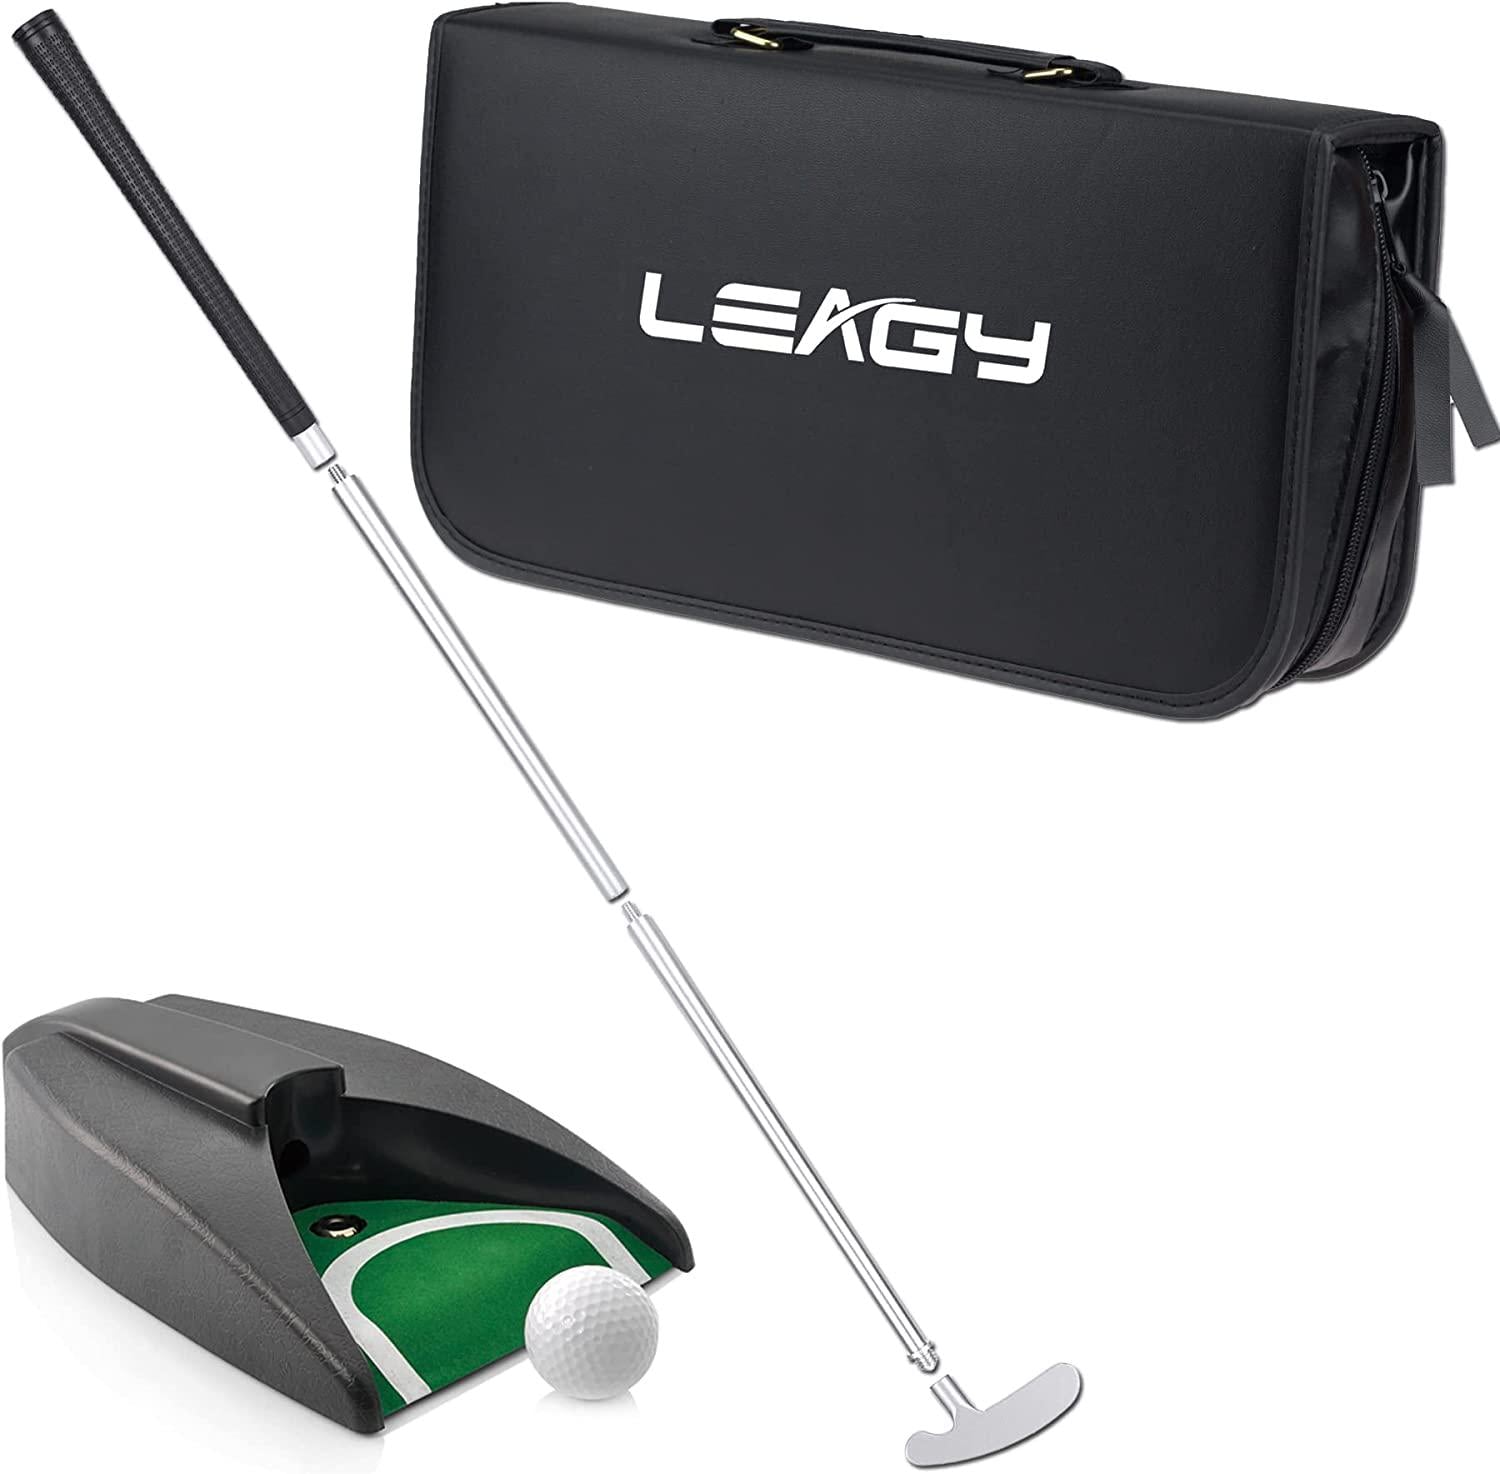 LEAGY, LEAGY Portable Golf Putter Travel Practise Putting Set with Case Indoor Outdoor Yard, Golfer Kids Toy Indoor Golf Games Set, Ball Return System Zink Alloy Putter Best Gift Executive Office Putter SET